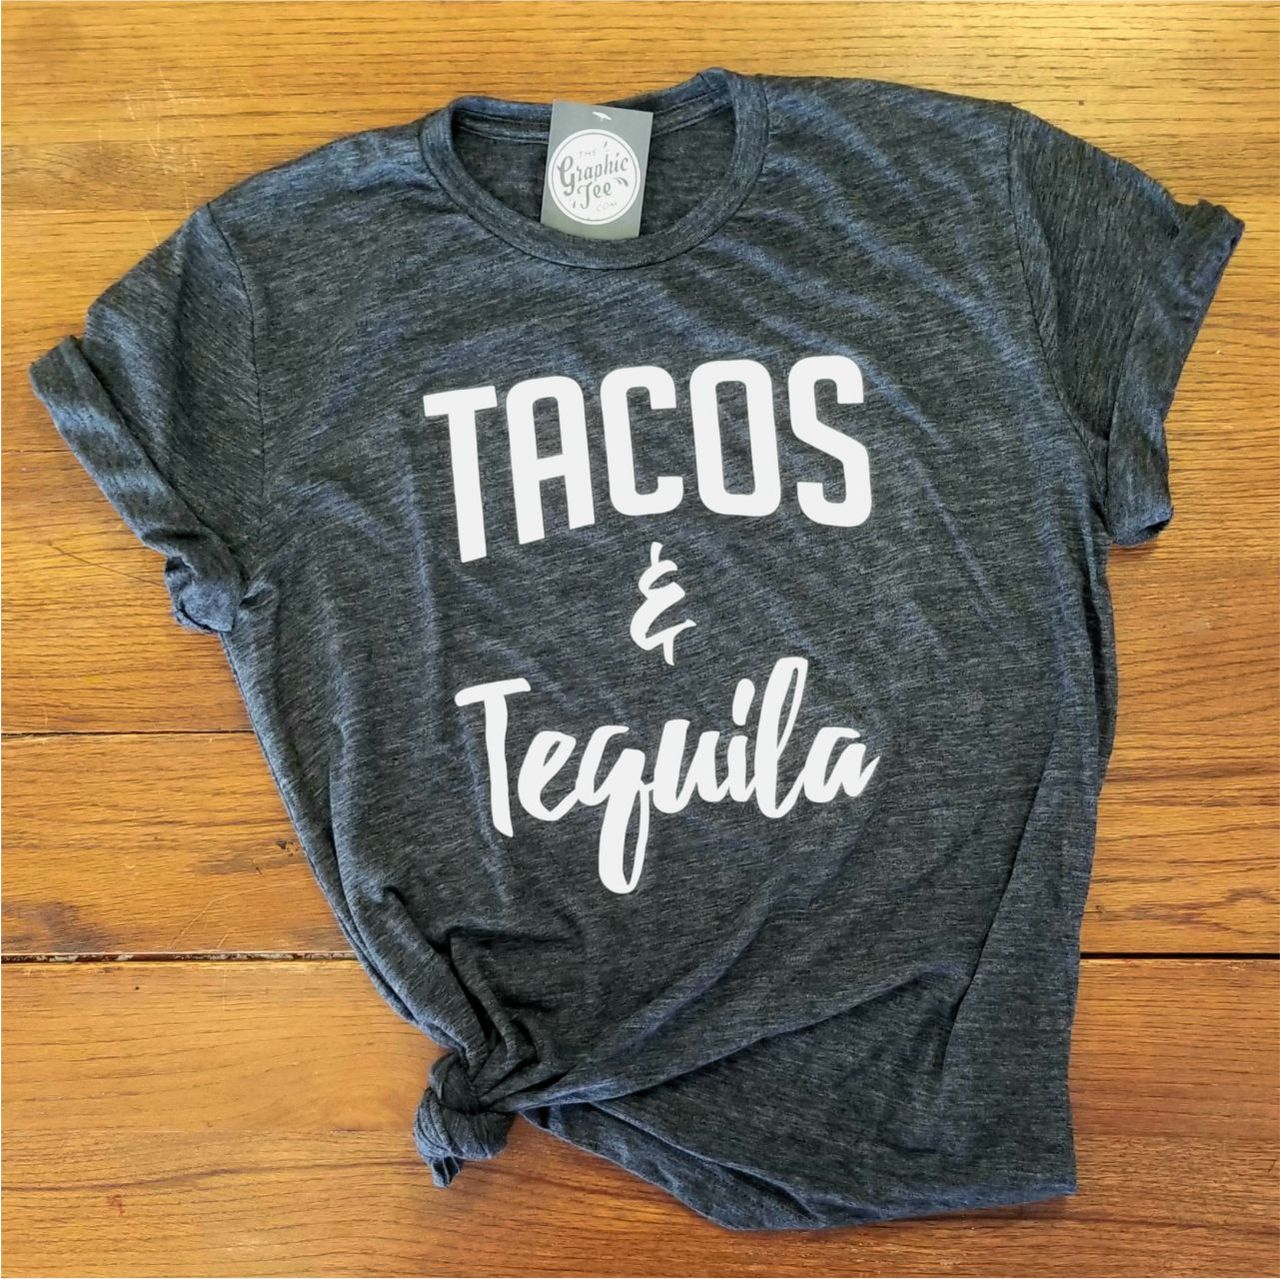 Tacos and Tequila - Unisex Crew - The Graphic Tee